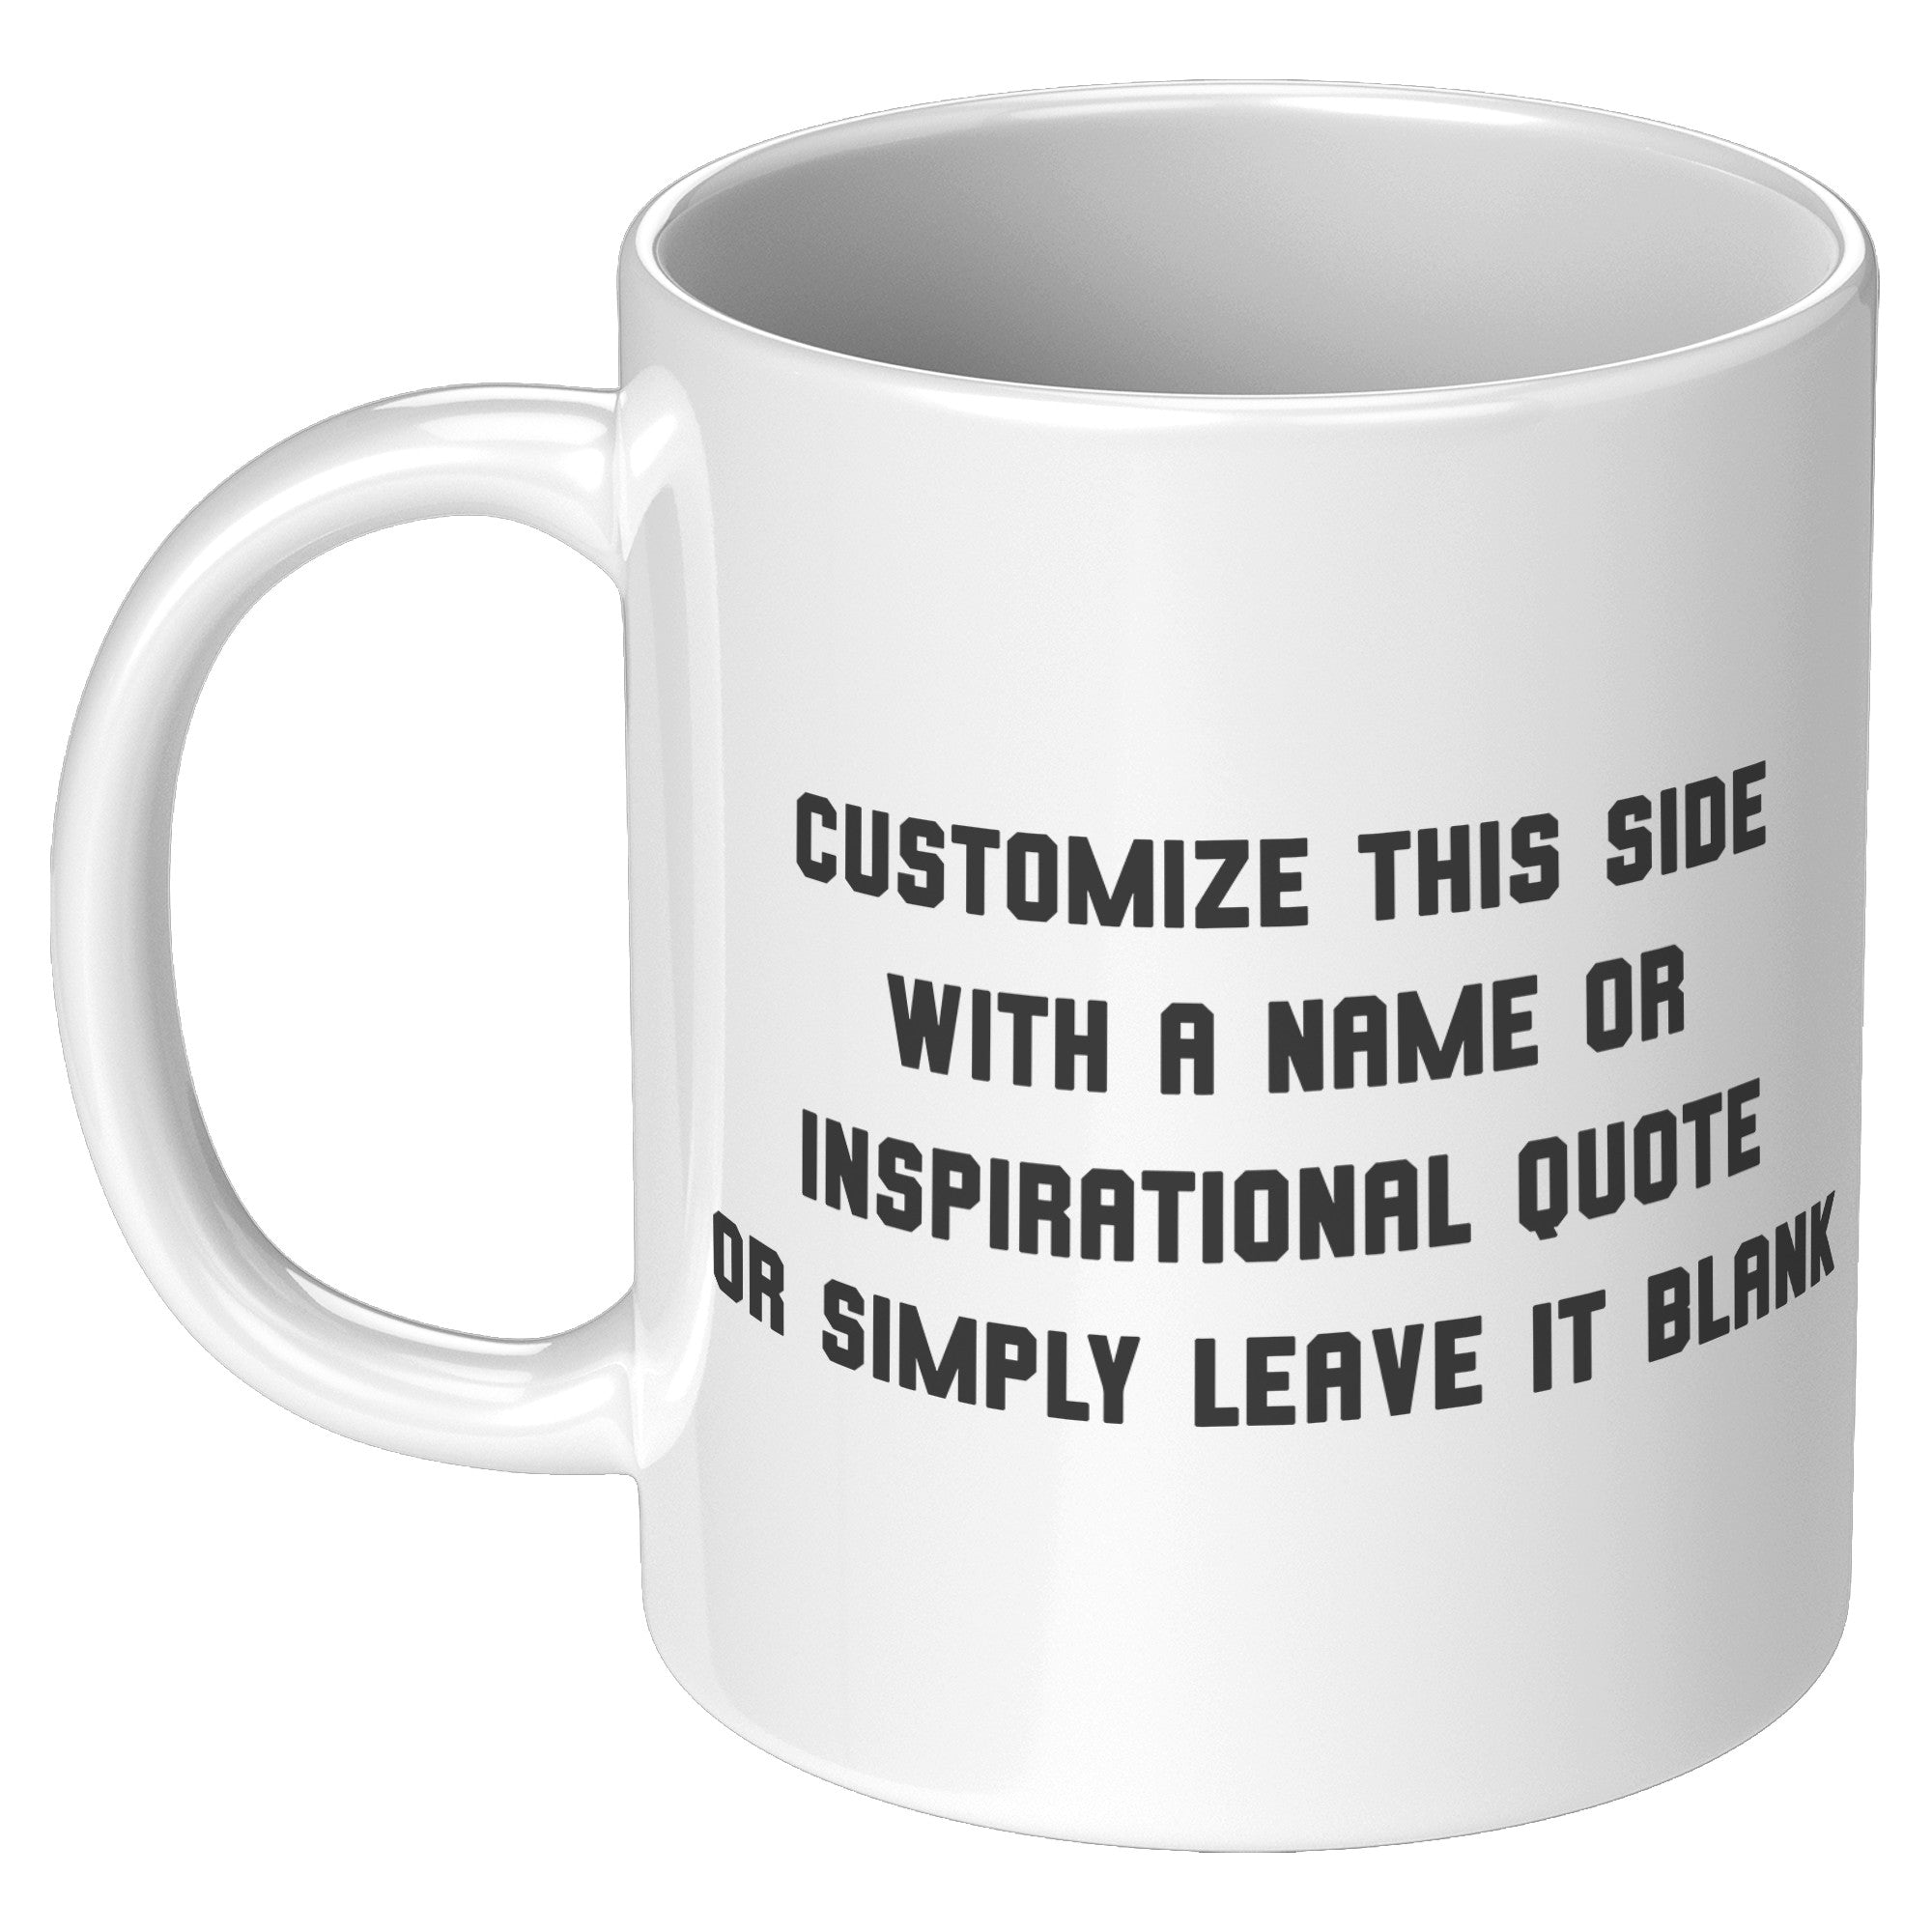 "Female Runner Coffee Mug - Inspirational Running Quotes Cup - Perfect Gift for Women Runners - Motivational Marathoner's Morning Brew" - L